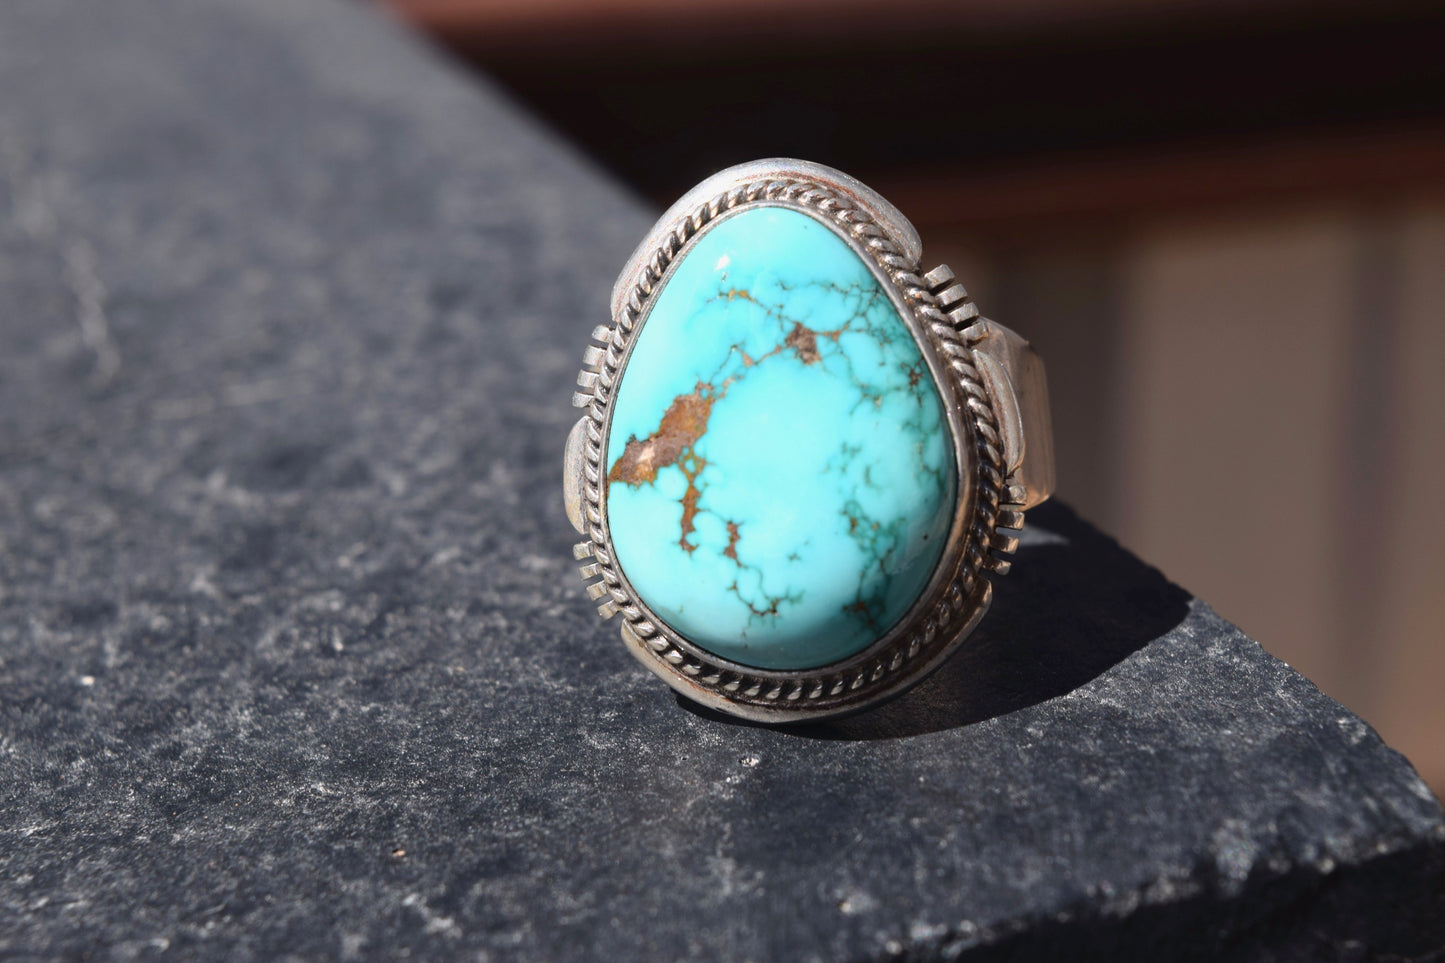 TEARDROP NEVADA TURQUOISE FROM THE RODGERS COLLECTION